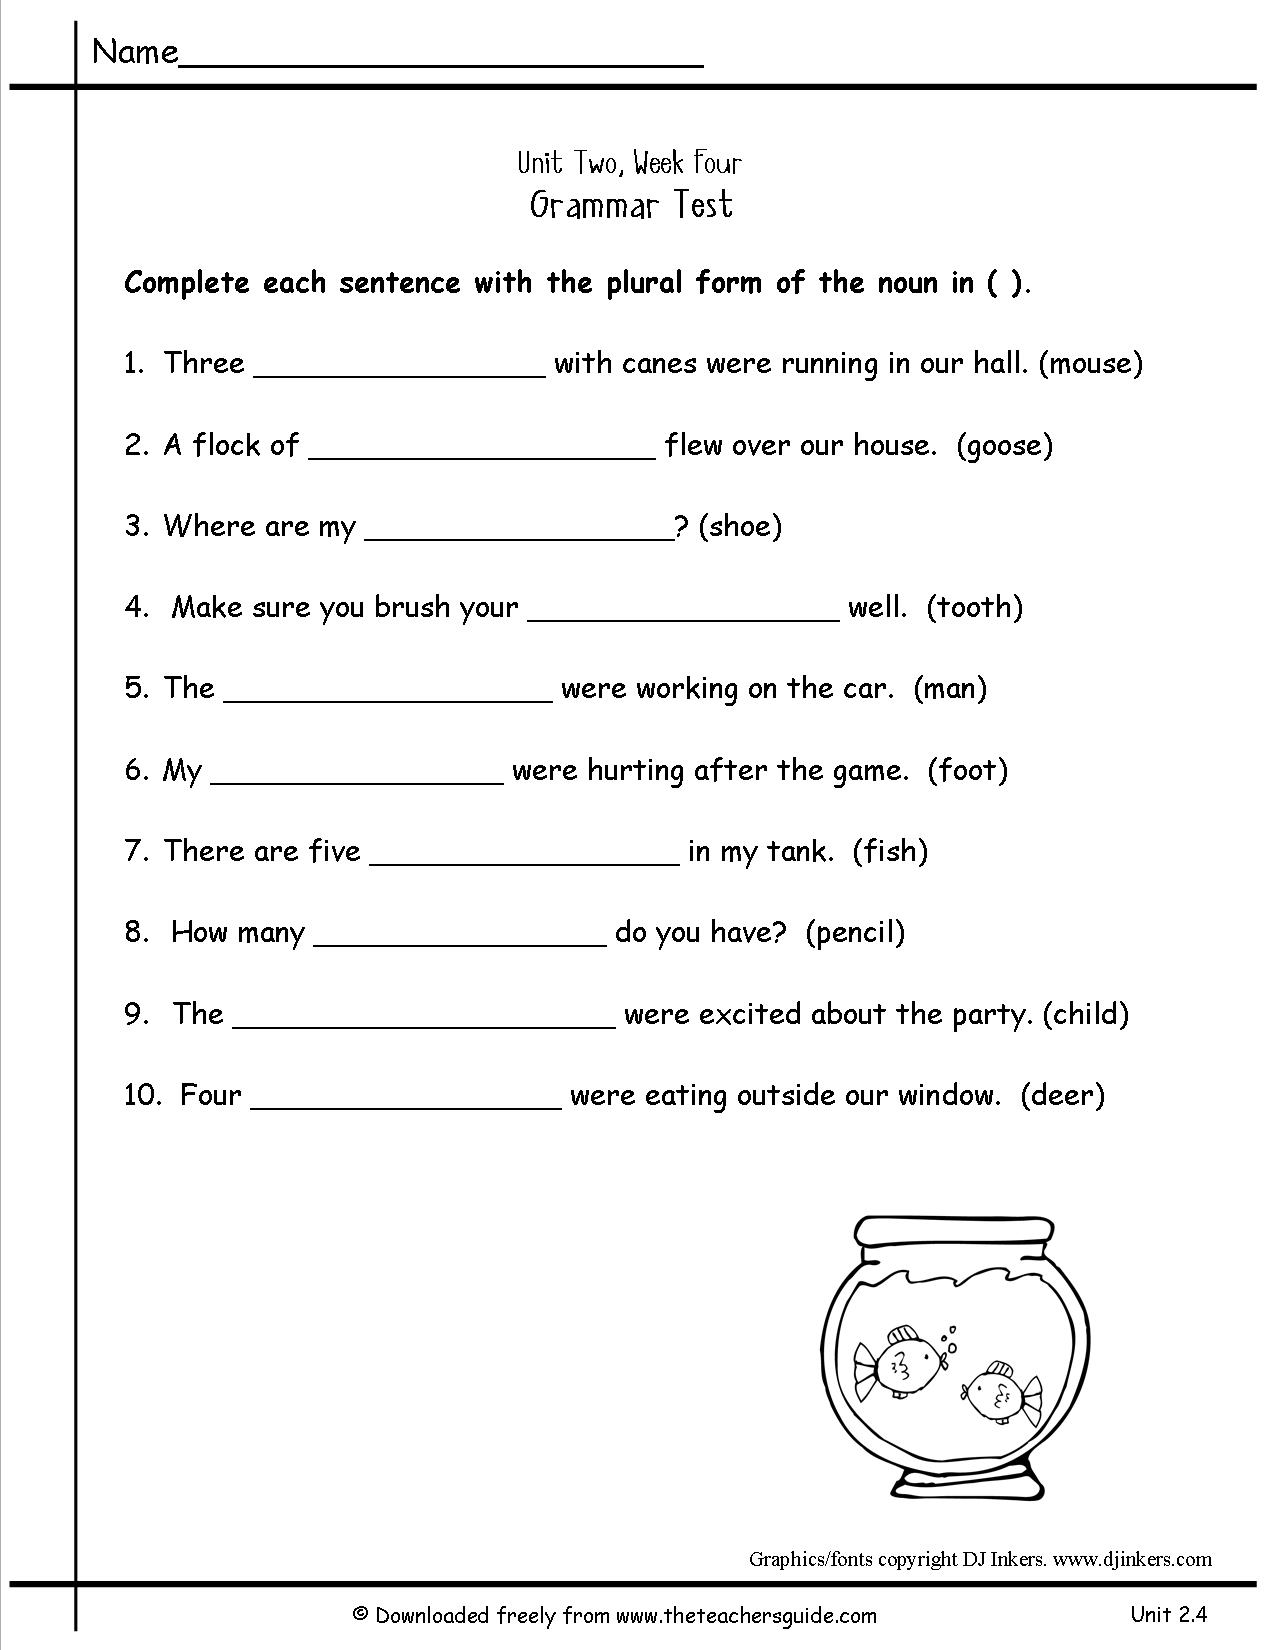 17-best-images-of-printable-suffixes-worksheets-latin-roots-prefixes-and-suffixes-suffixes